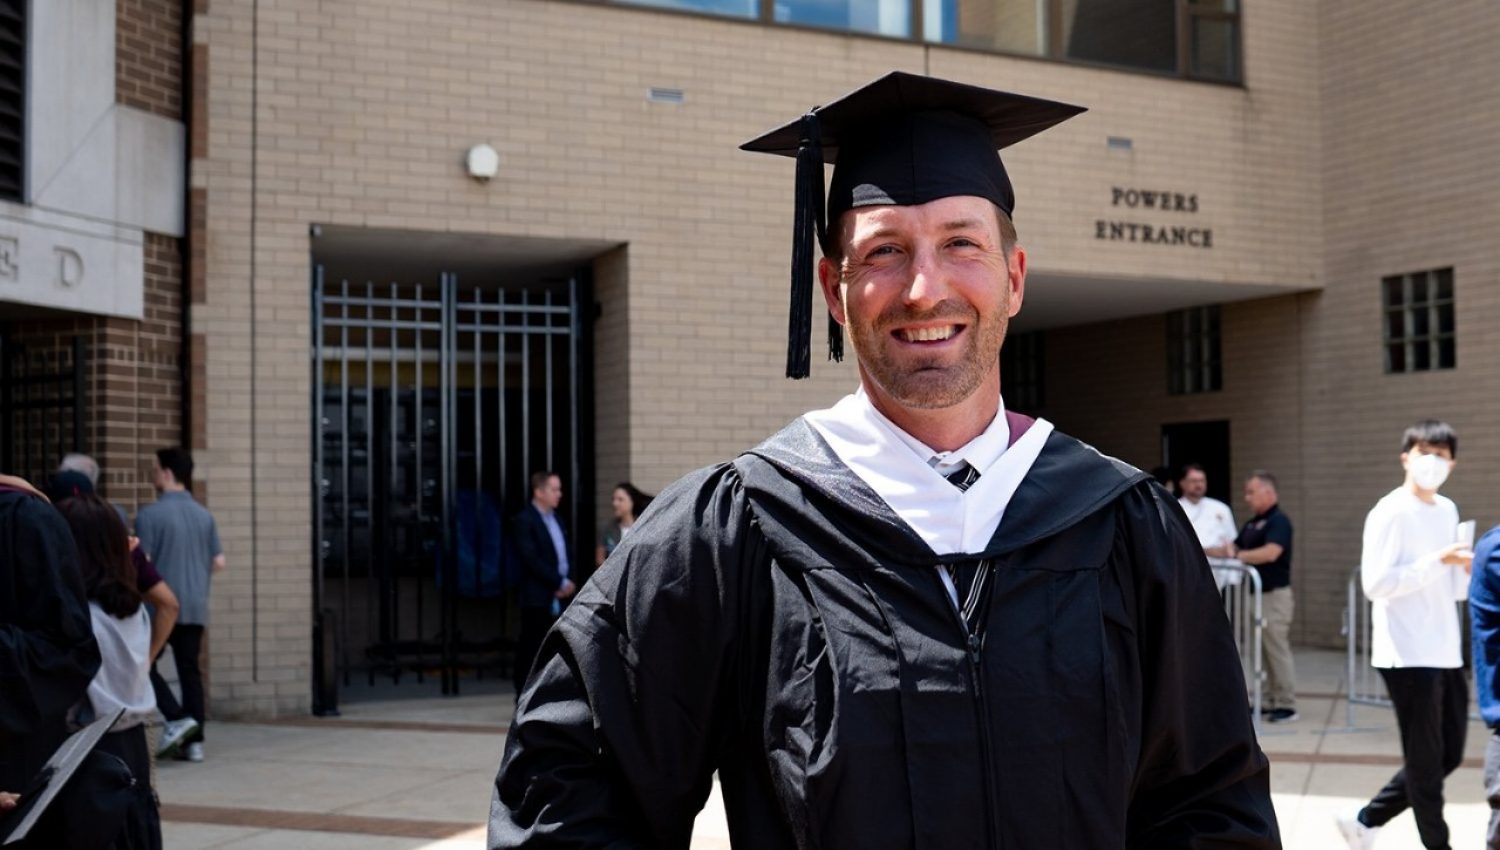 Brooks Orpik in cap and gown